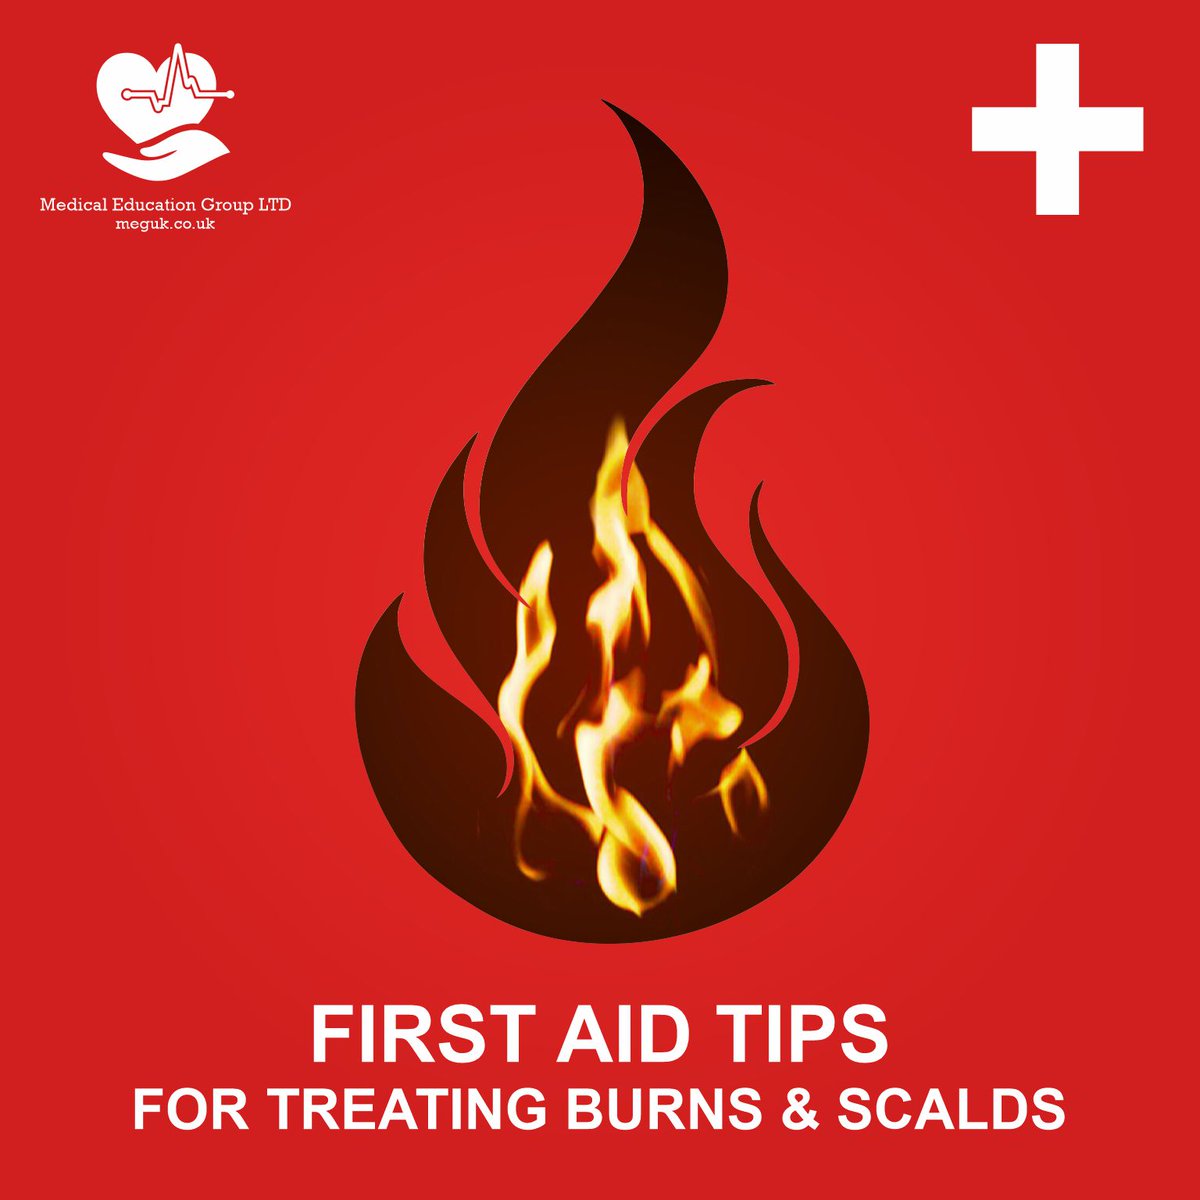 🔥💦 Quick tips for treating burns & scalds:
Cool it down! Run cool water over the burn for 10 mins.
Gently remove clothing, avoid popping blisters.
Protect with non-stick dressing or cling film.
Seek medical advice for severe burns. Stay safe! 💙 #BurnCare #SafetyTips